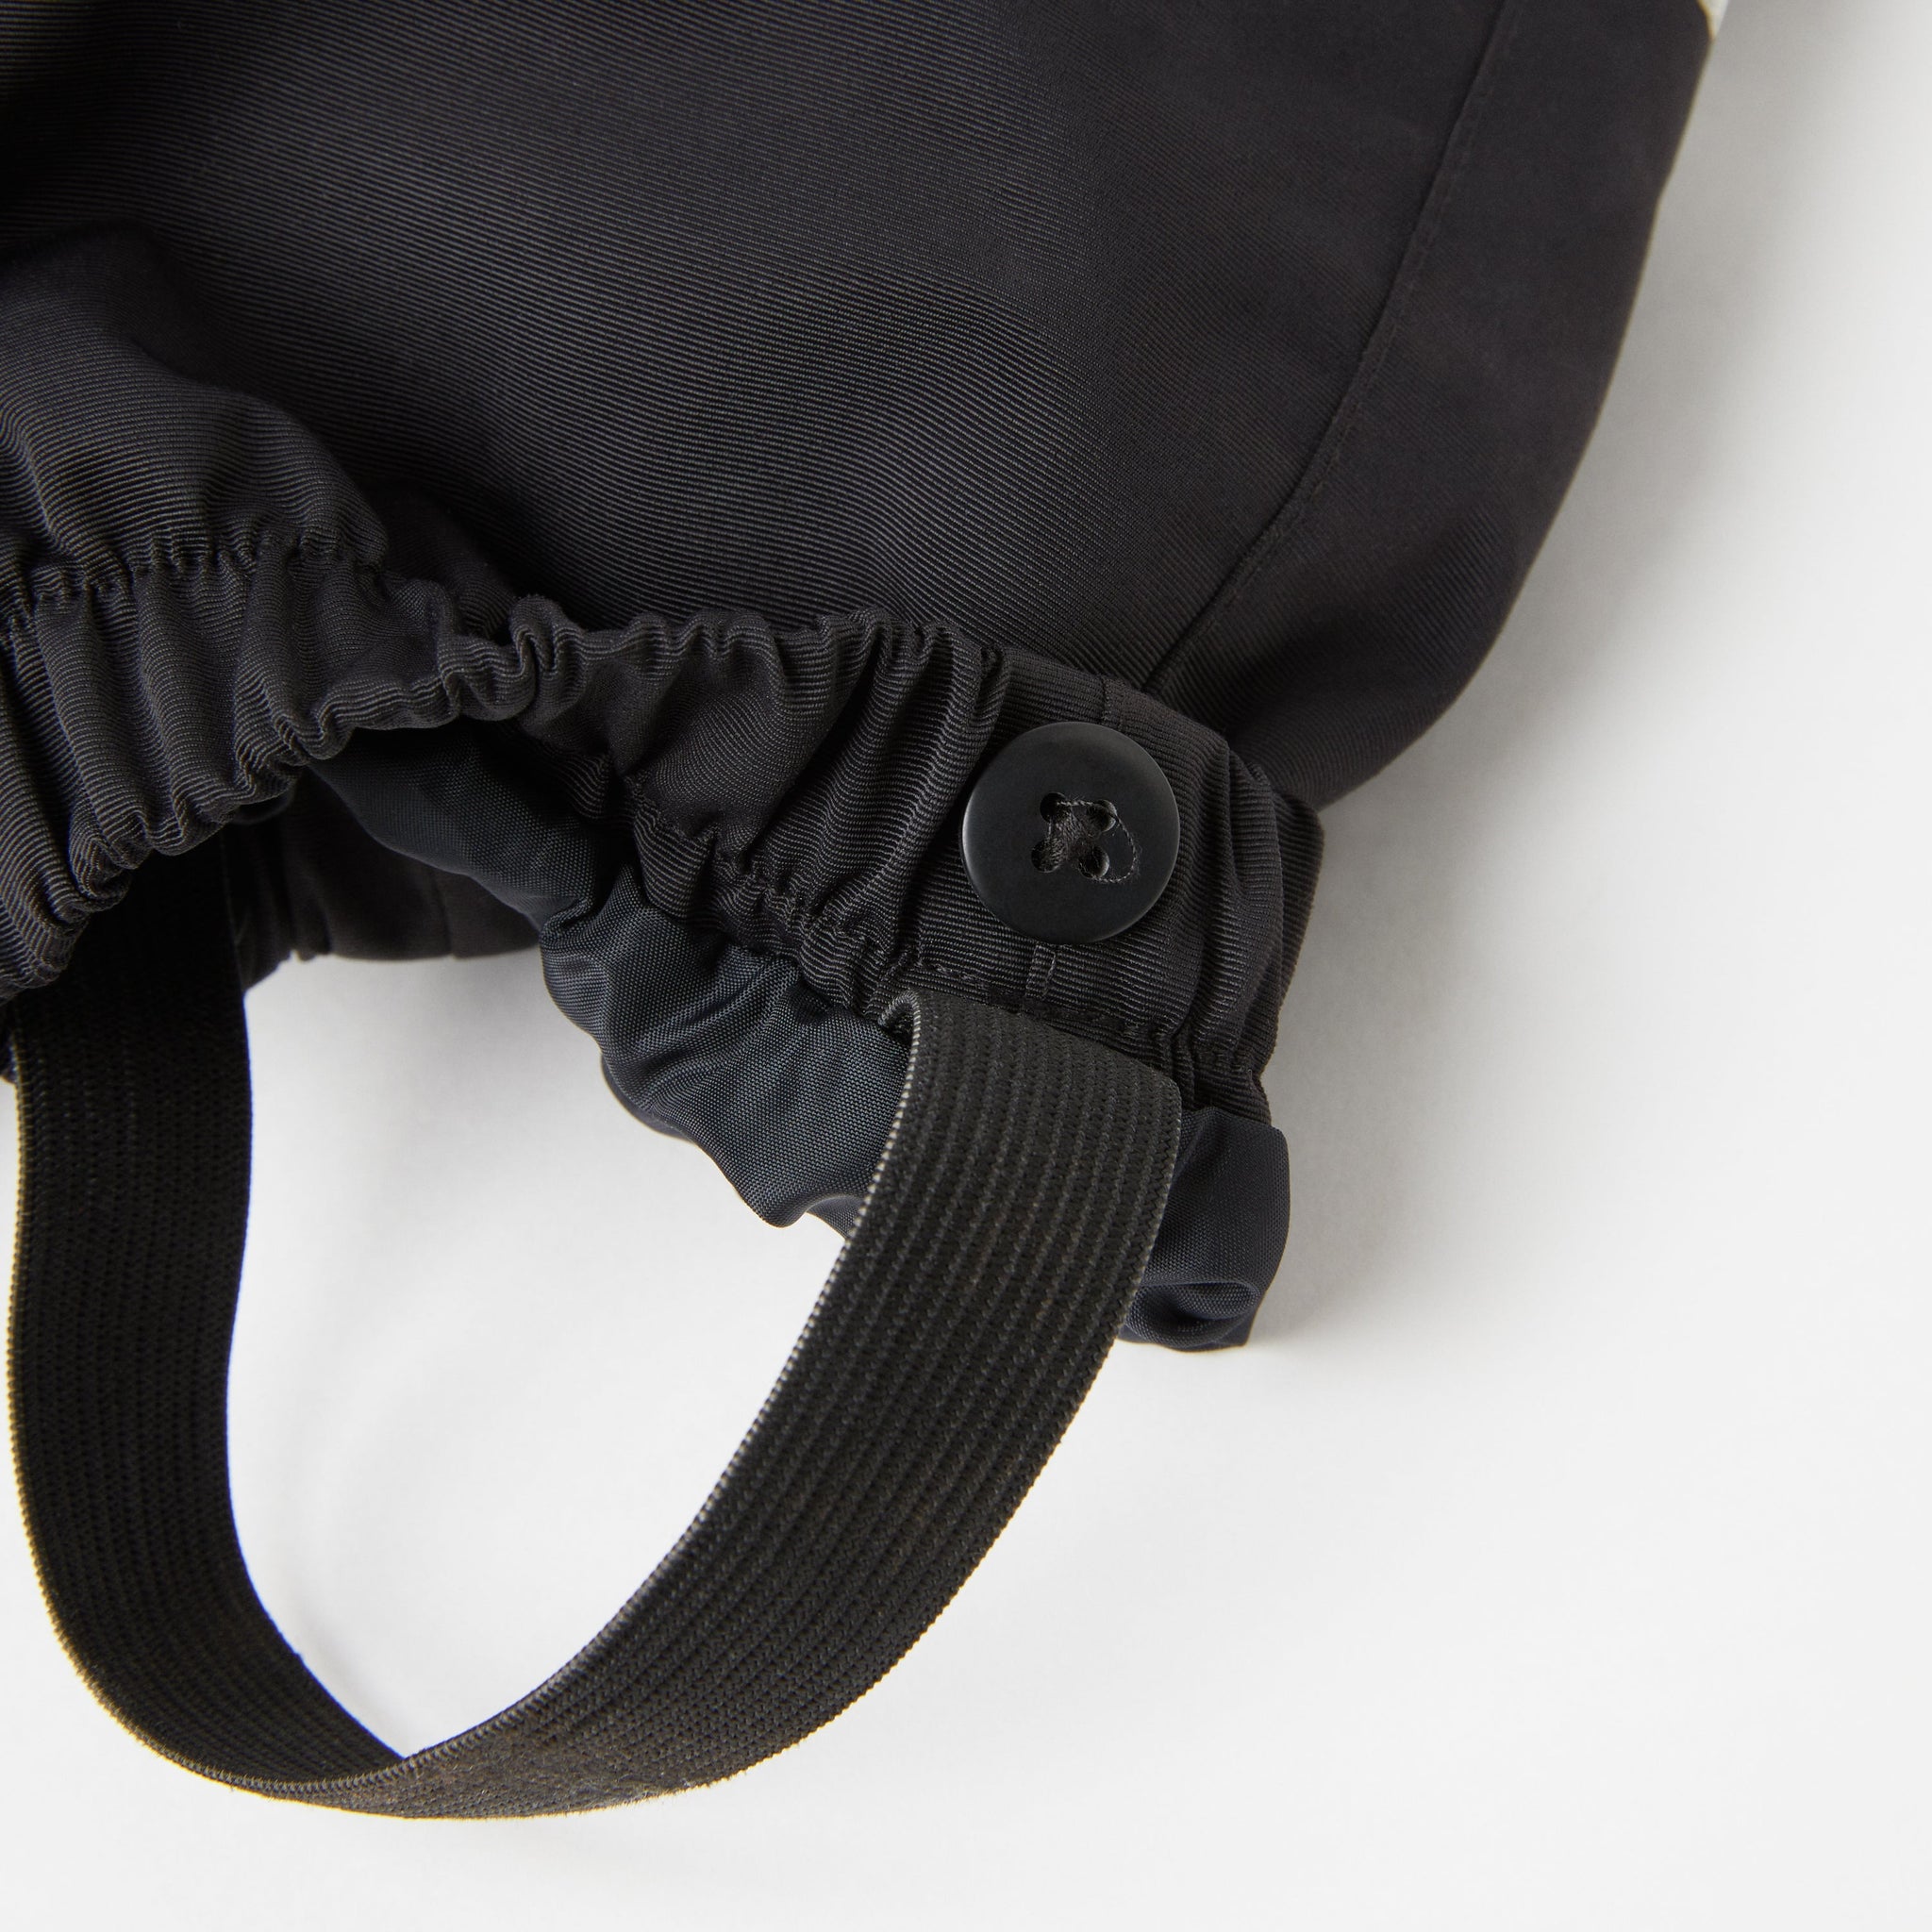 Kids Black Waterproof Trousers from the Polarn O. Pyret kidswear collection. Ethically produced kids outerwear.